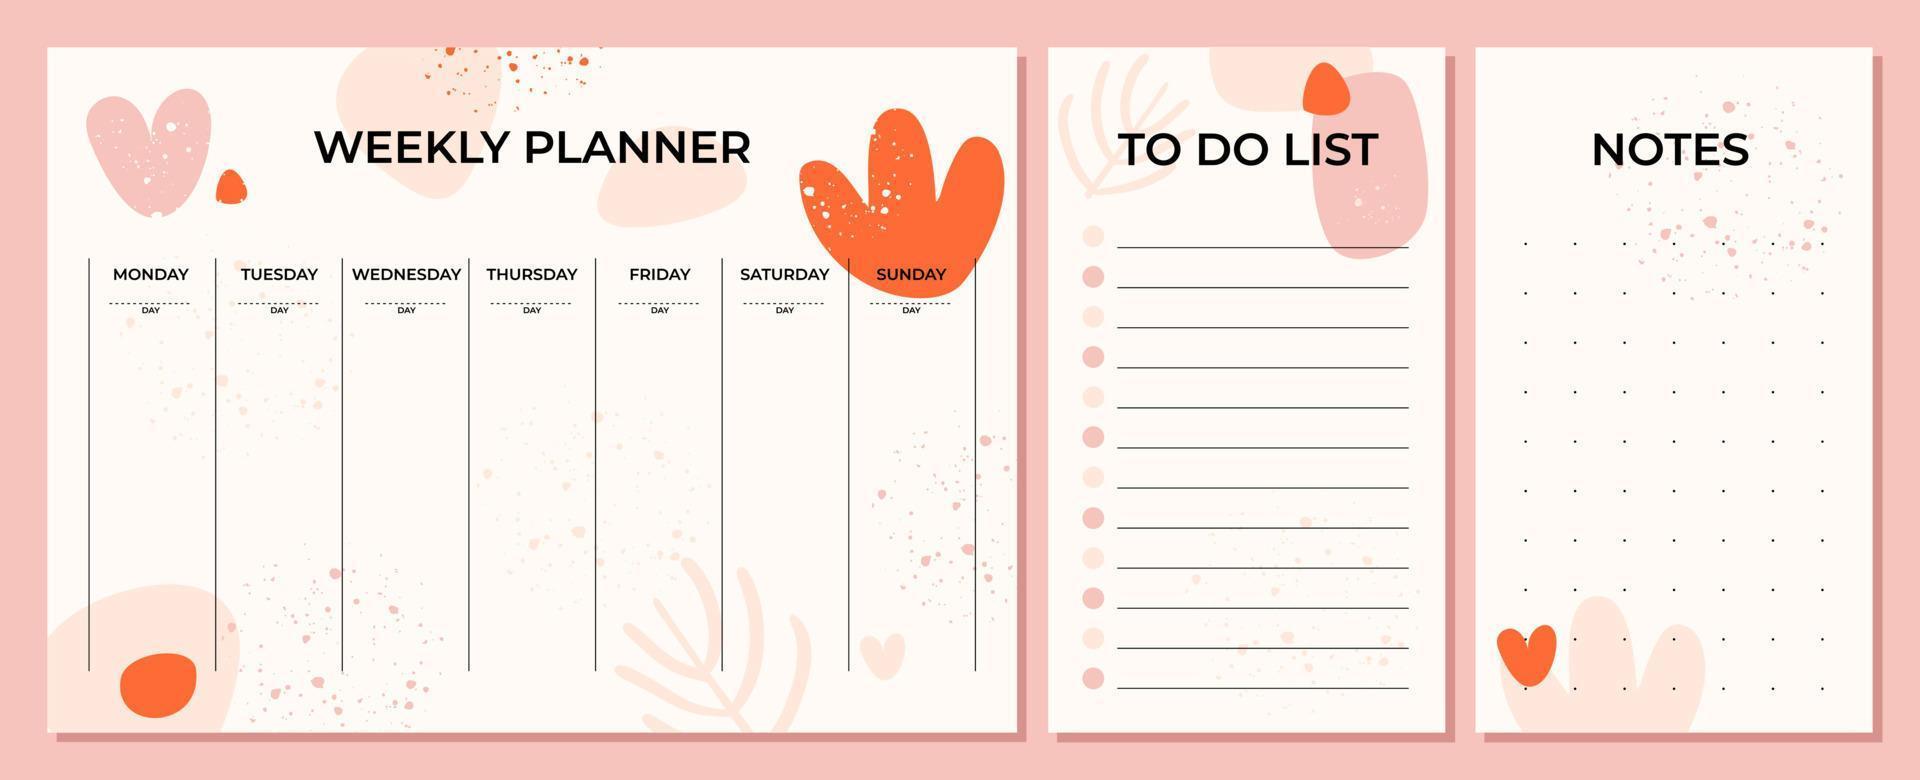 Delicate pink weekly glider. Girly grunge and abstractions. Form to do list and notes. For printing vector